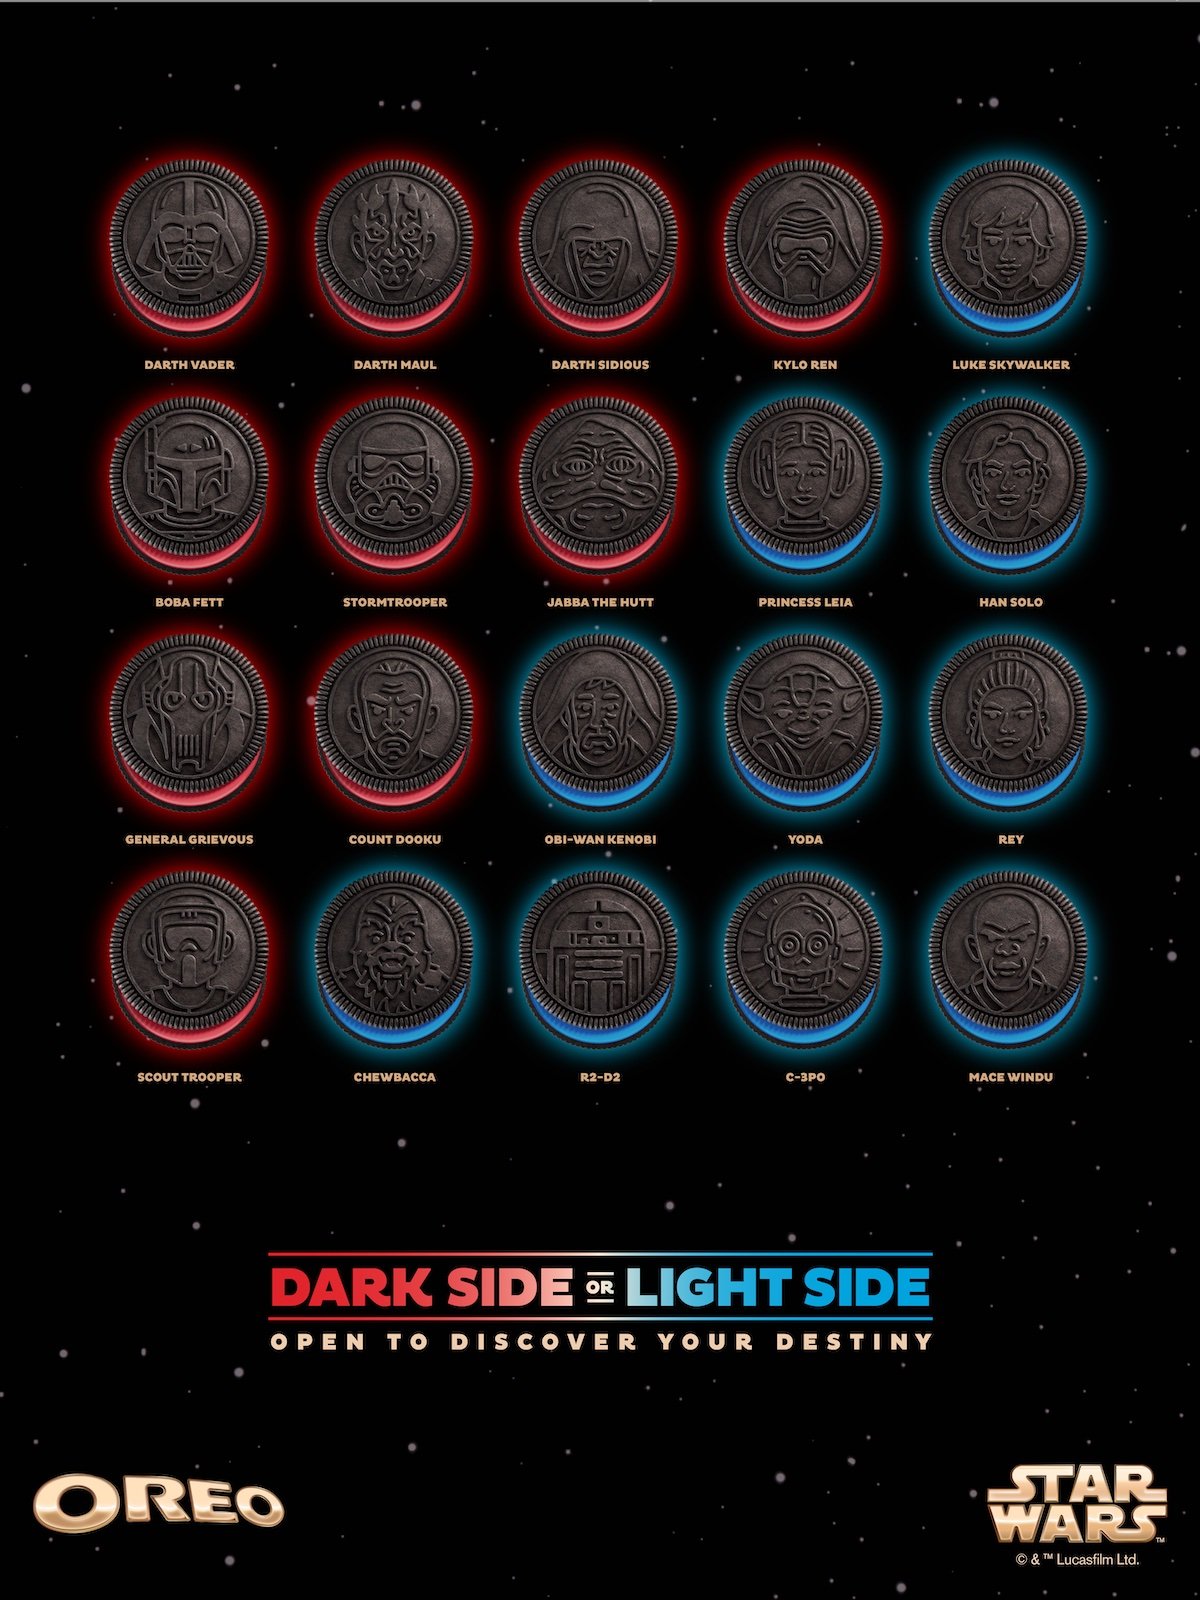 20 Star Wars Oreo character designs, half with red creme half with blue